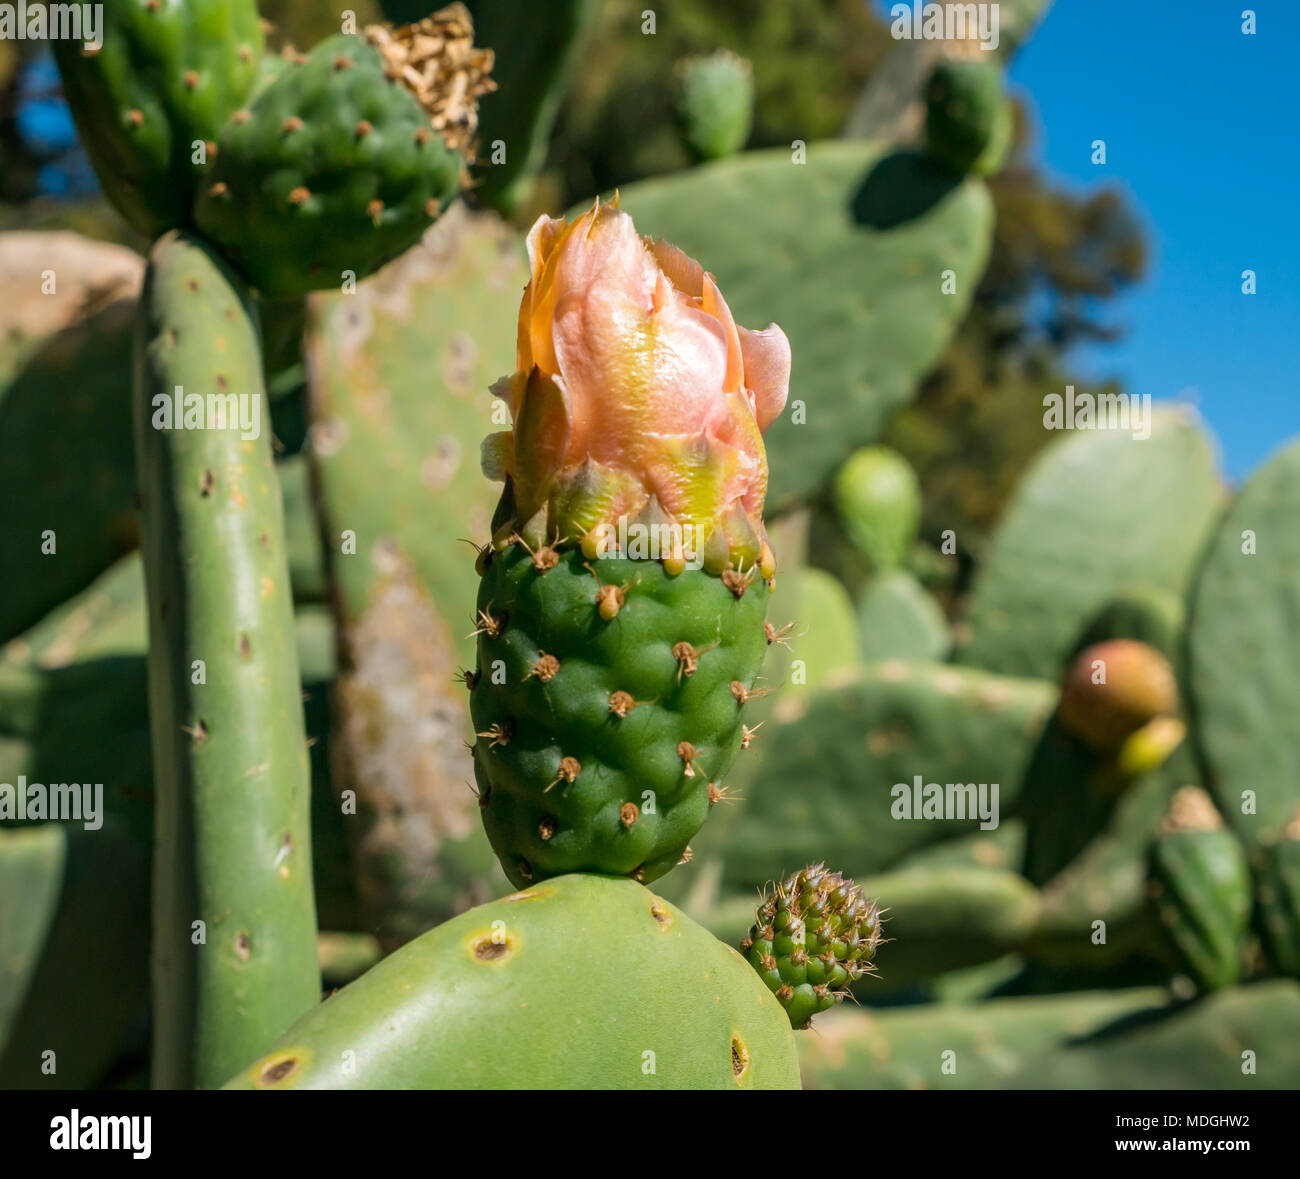 Close up of sunlit prickly pear cactus fruit, and flower, Opuntia, growing in Santa Cruz, Colchagua Valley, Chile, South America Stock Photo